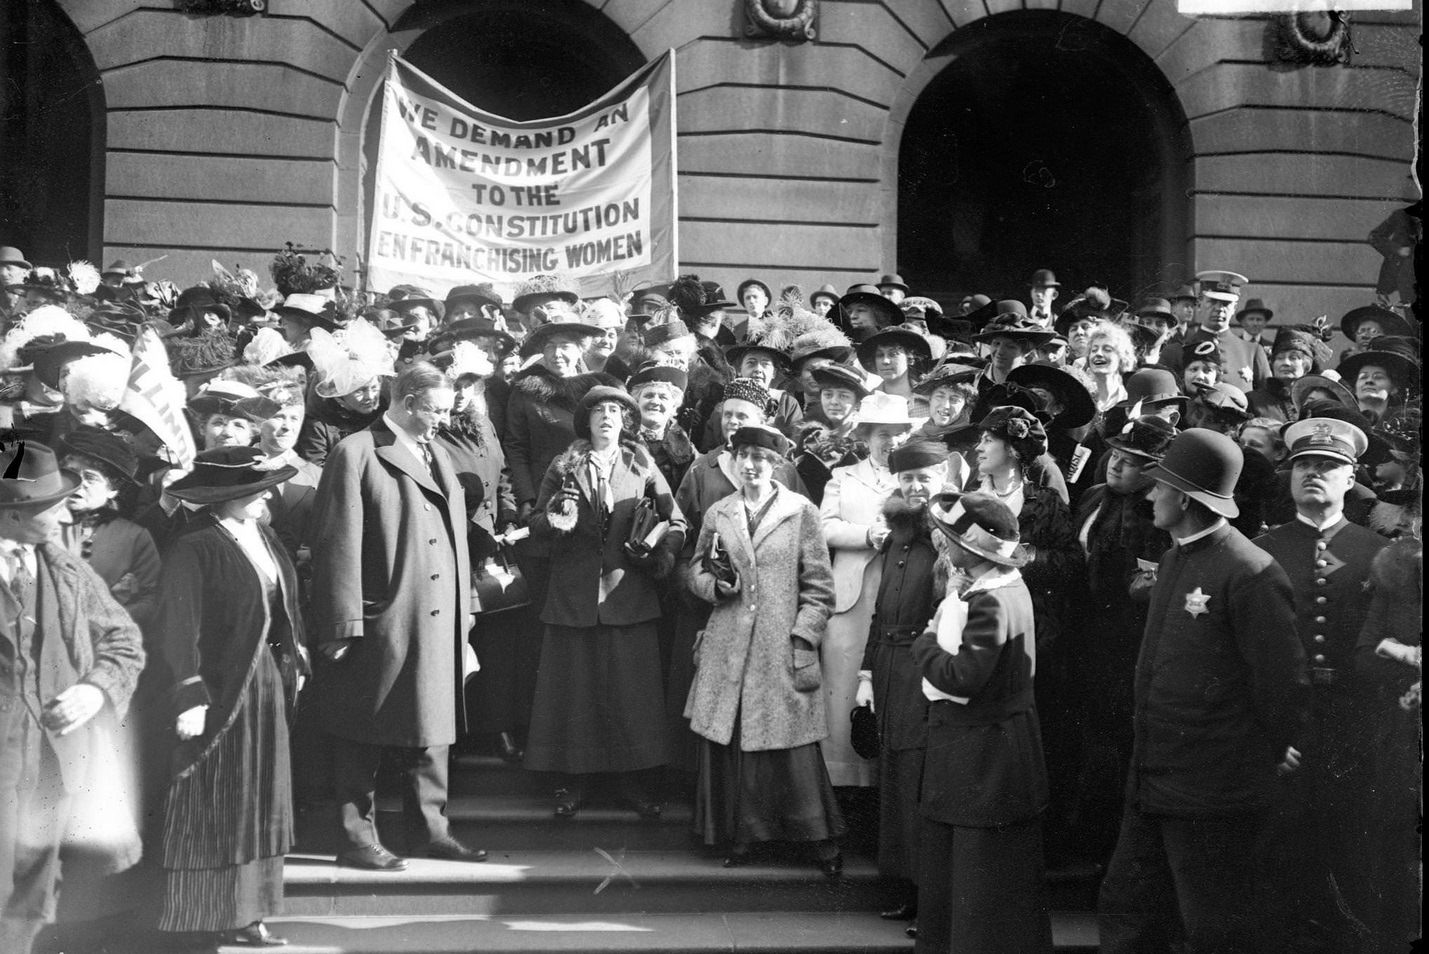 Sara Bard Field, a poet and suffragist, standing in the midst of suffragists in front of the Art Institute of Chicago, located at 111 South Michigan Avenue in the Loop community area, Chicago, Illinois, December 30, 1915.